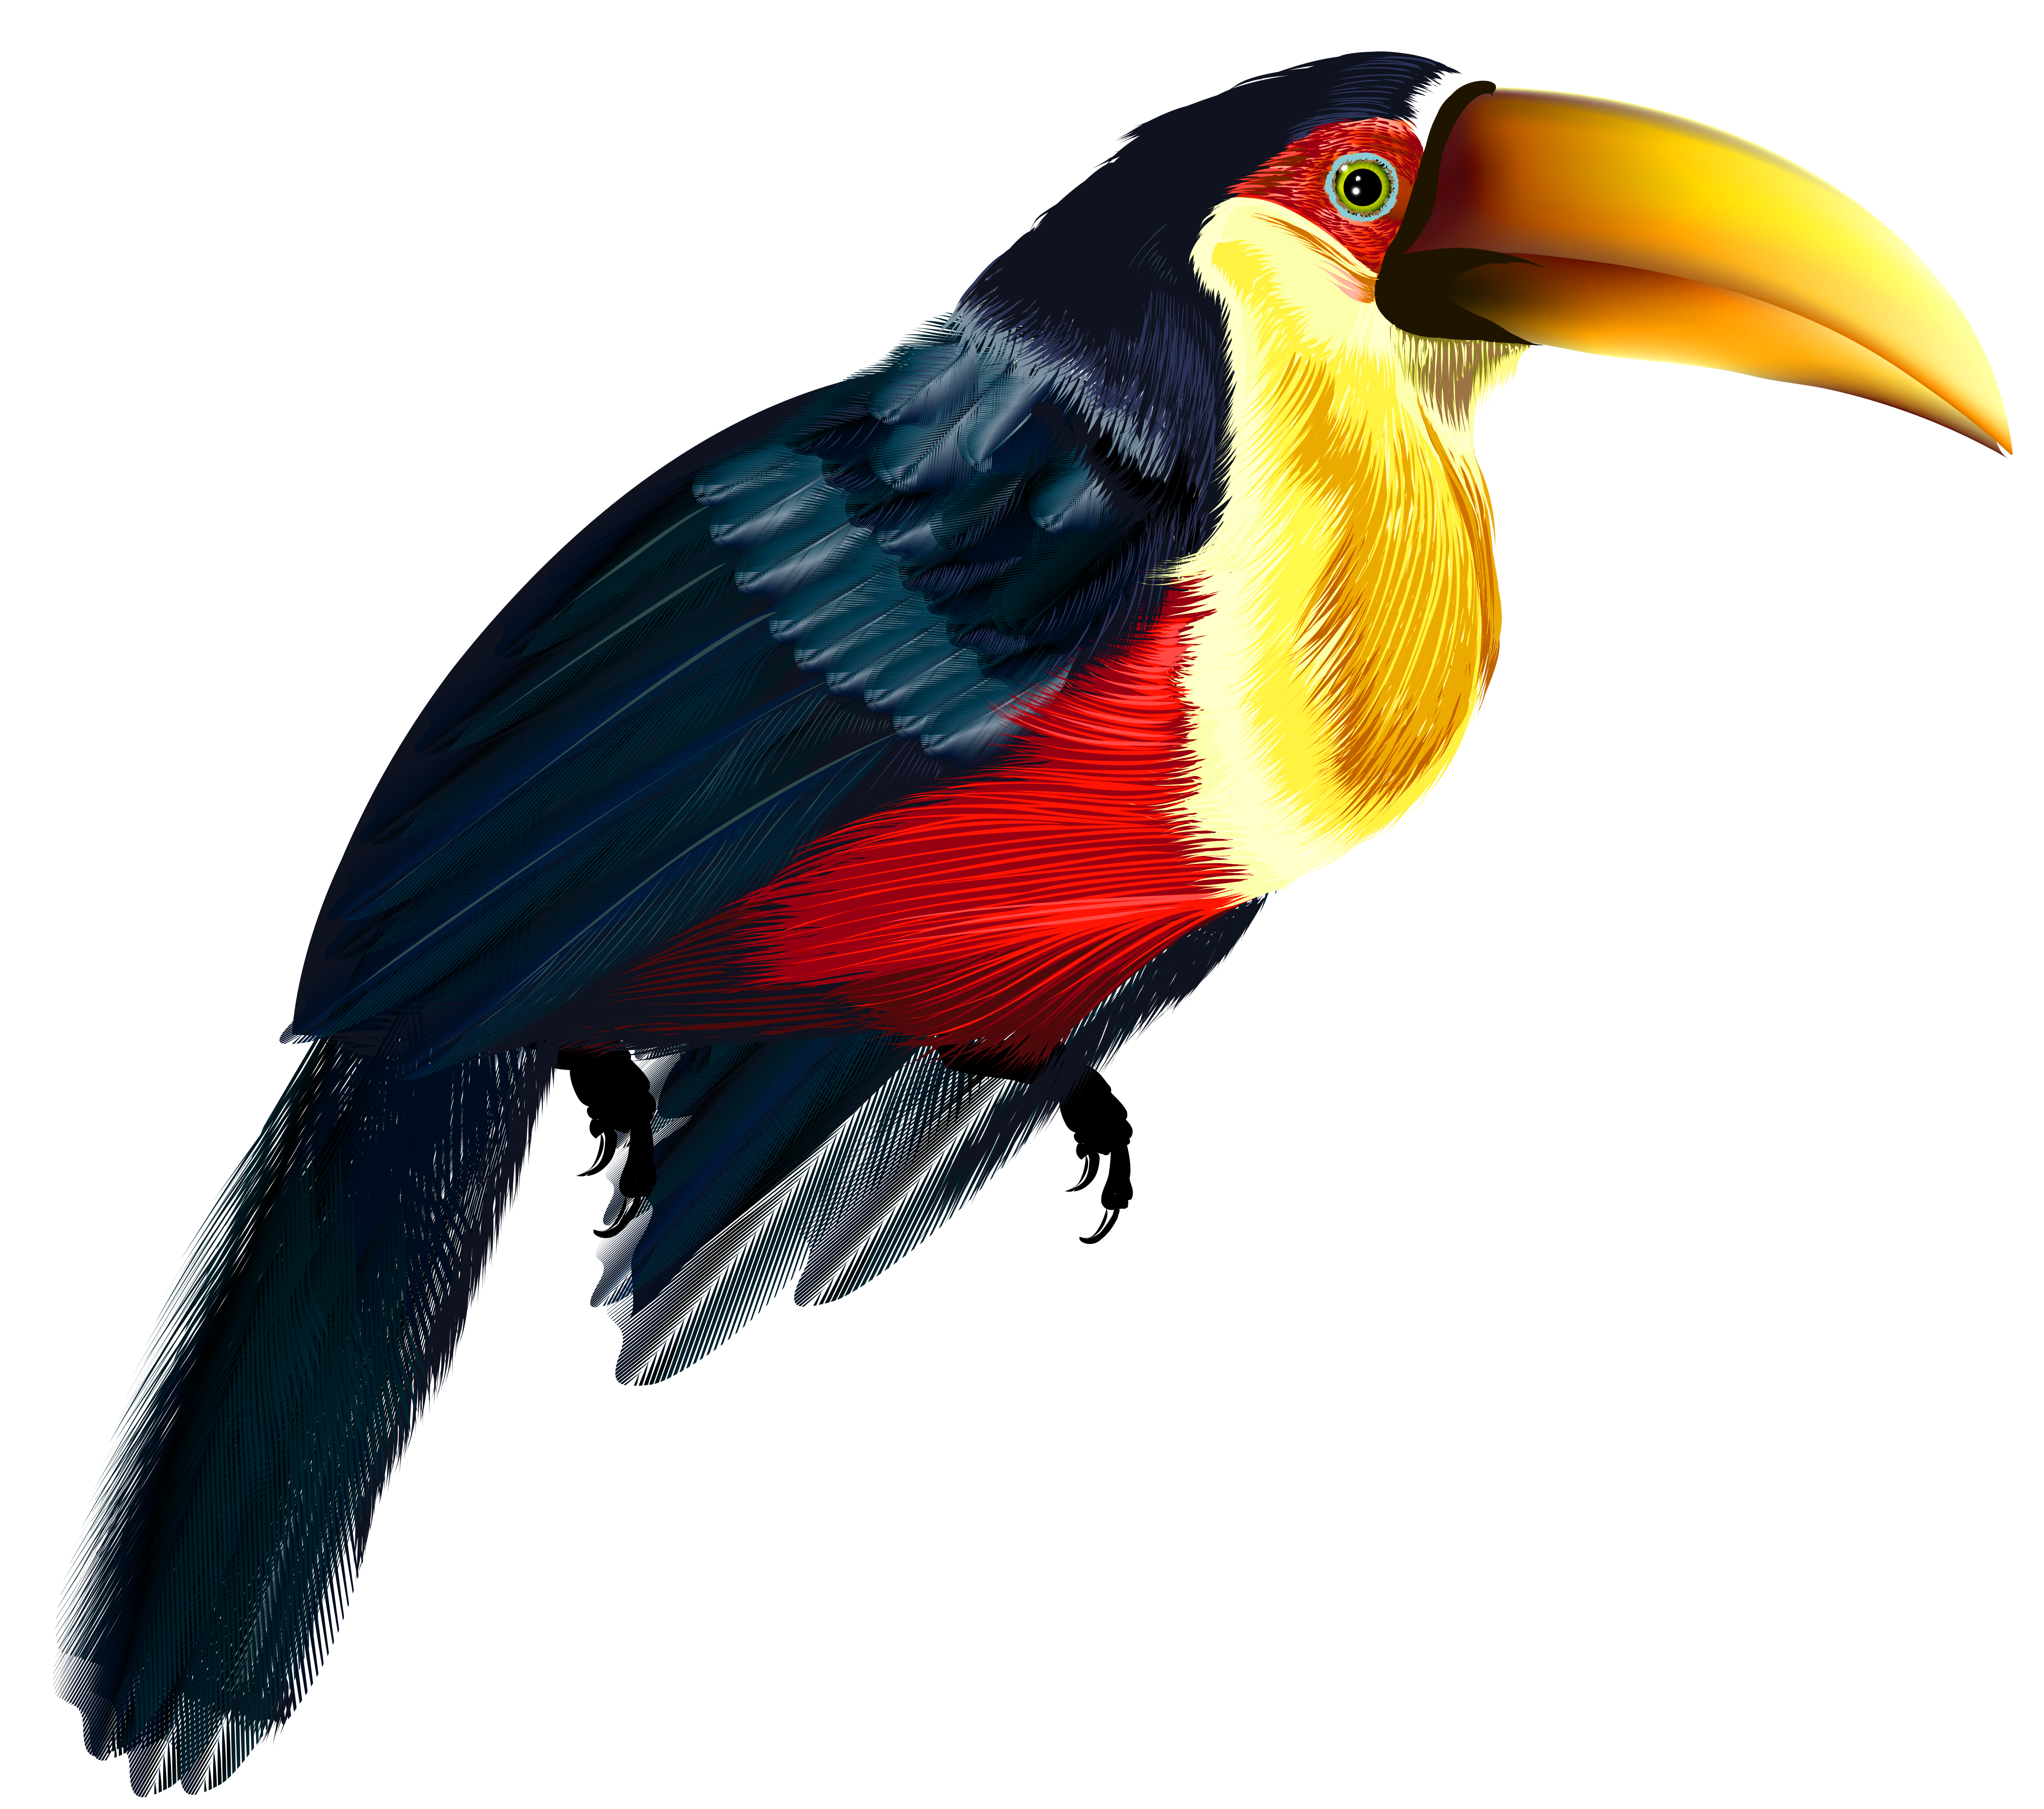 Transparent png gallery yopriceville. Toucan clipart bird's